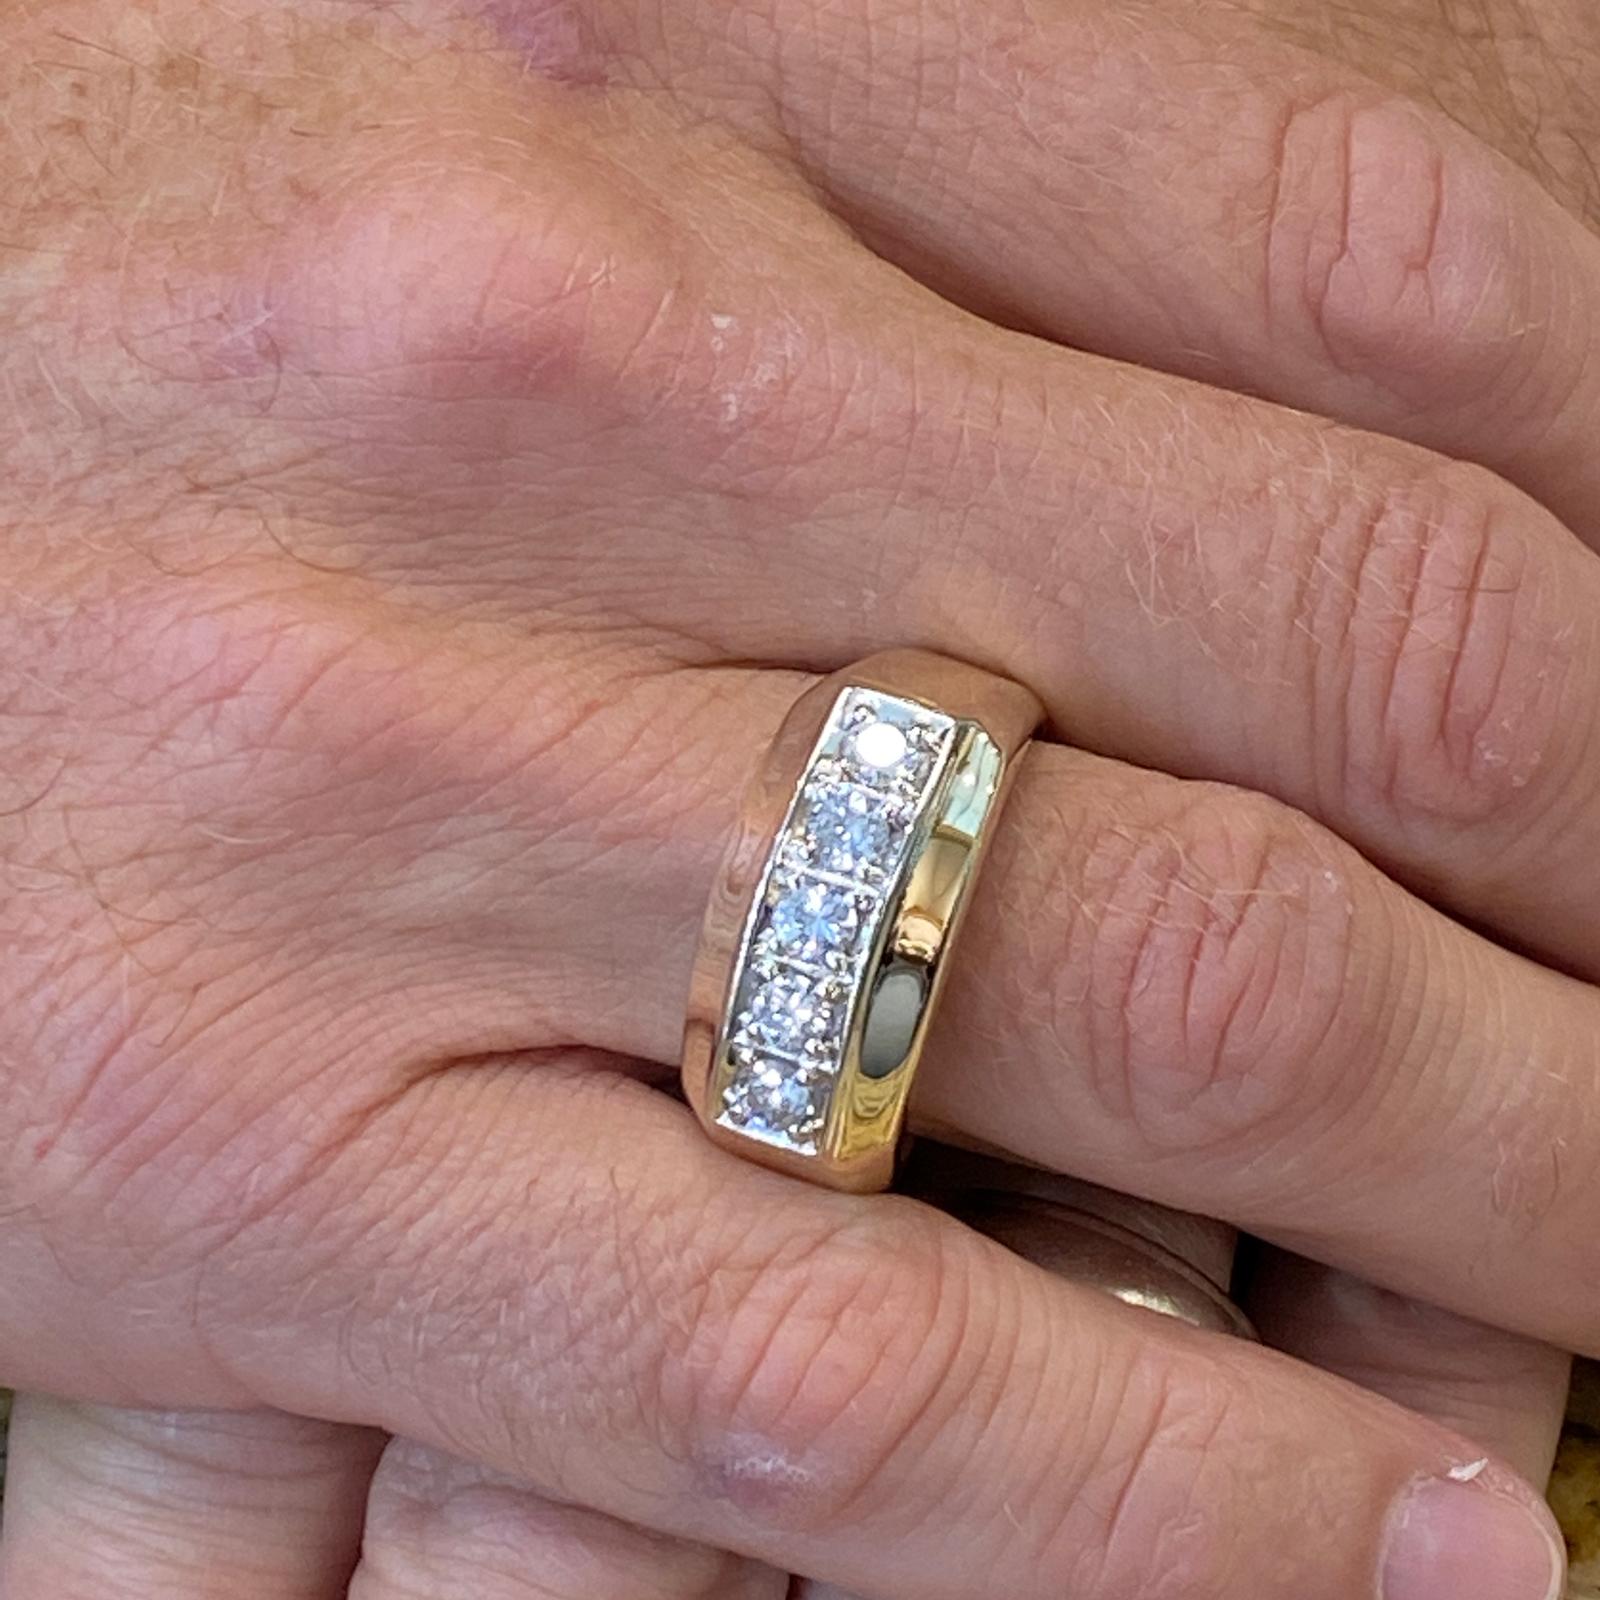 Men's diamond band fashioned in 14 karat yellow gold. The ring features 5 round brilliant cut diamonds weighing 1.00 carat total weight and graded H-I color and SI clarity. The band measures 10mm in width, and is currently size 12.5 (can be sized).